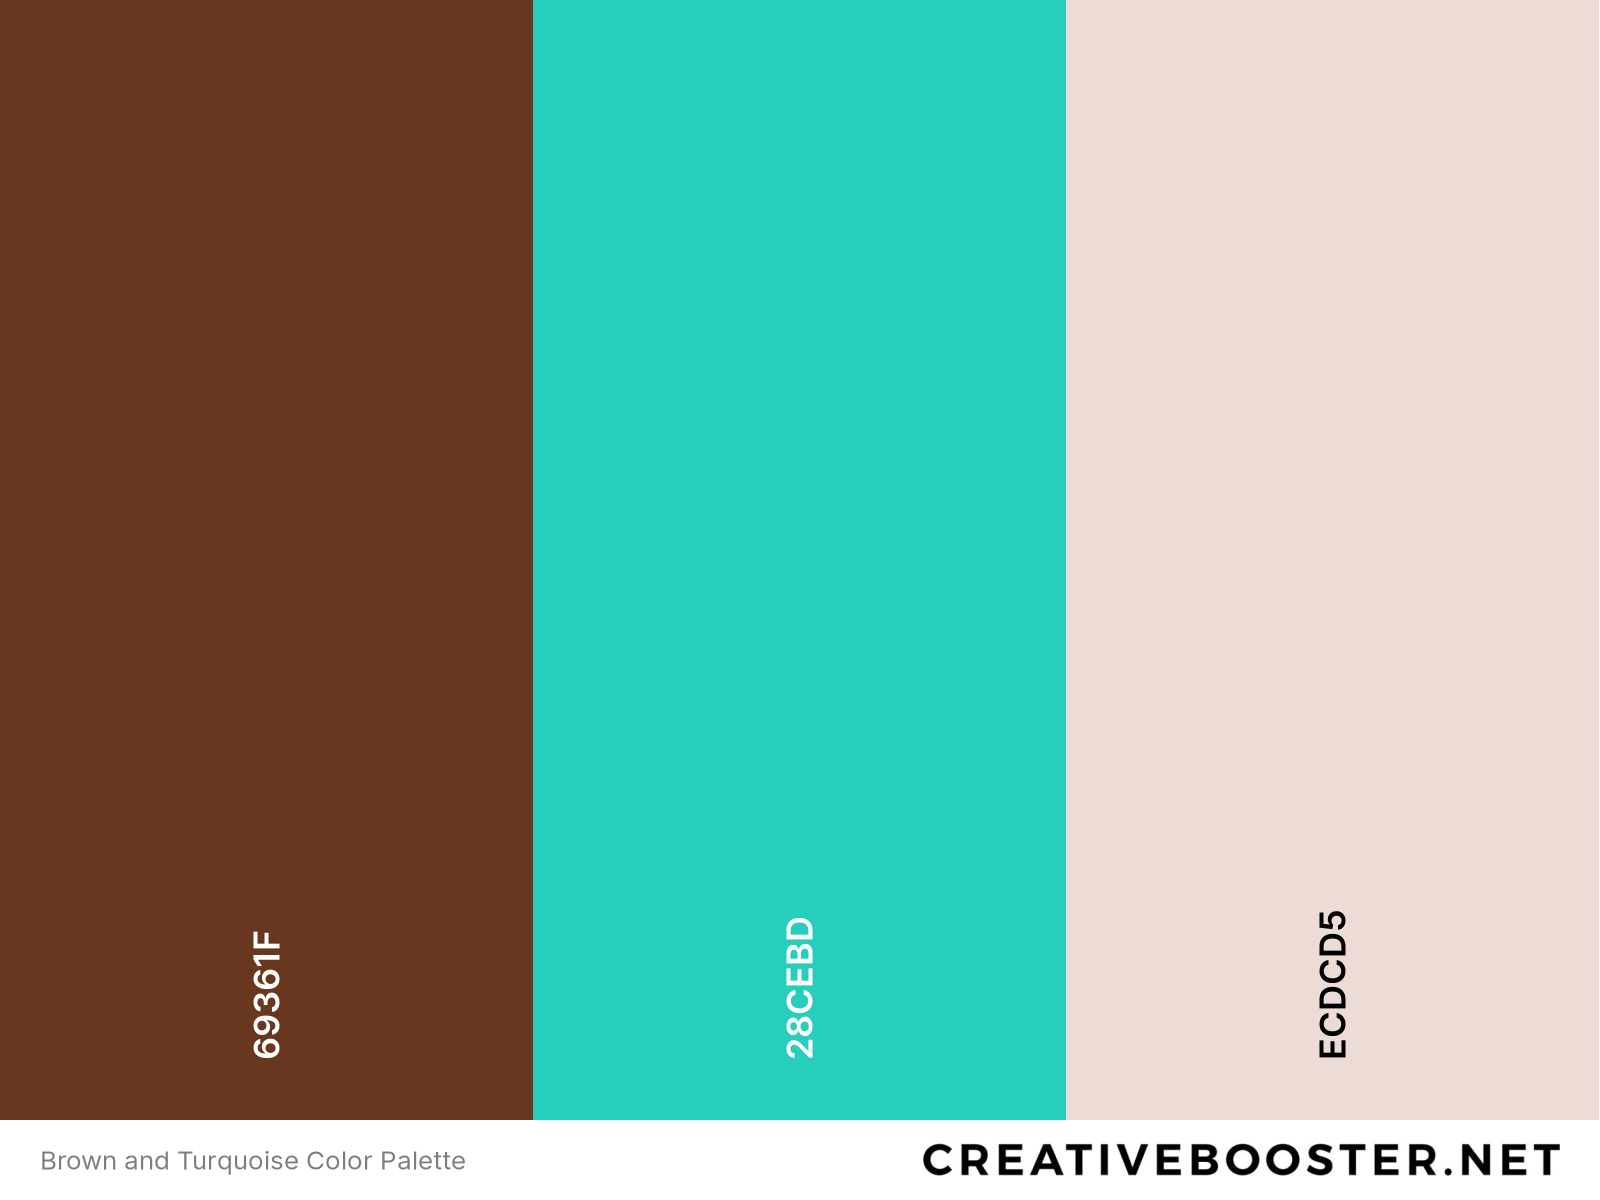 Brown and Turquoise Color Palette